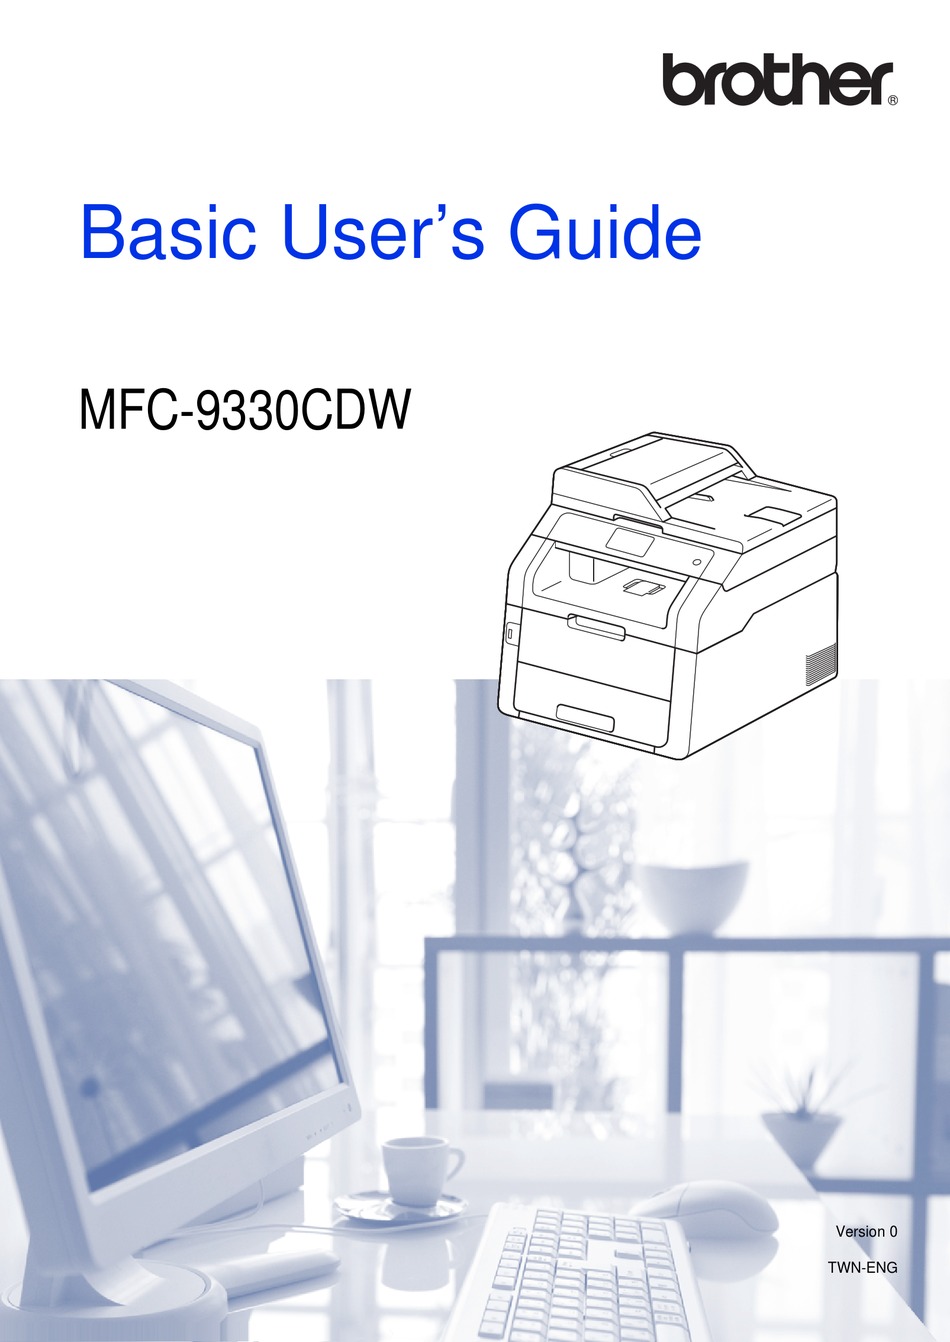 brother mfc 9330cdw how to setup scan to email